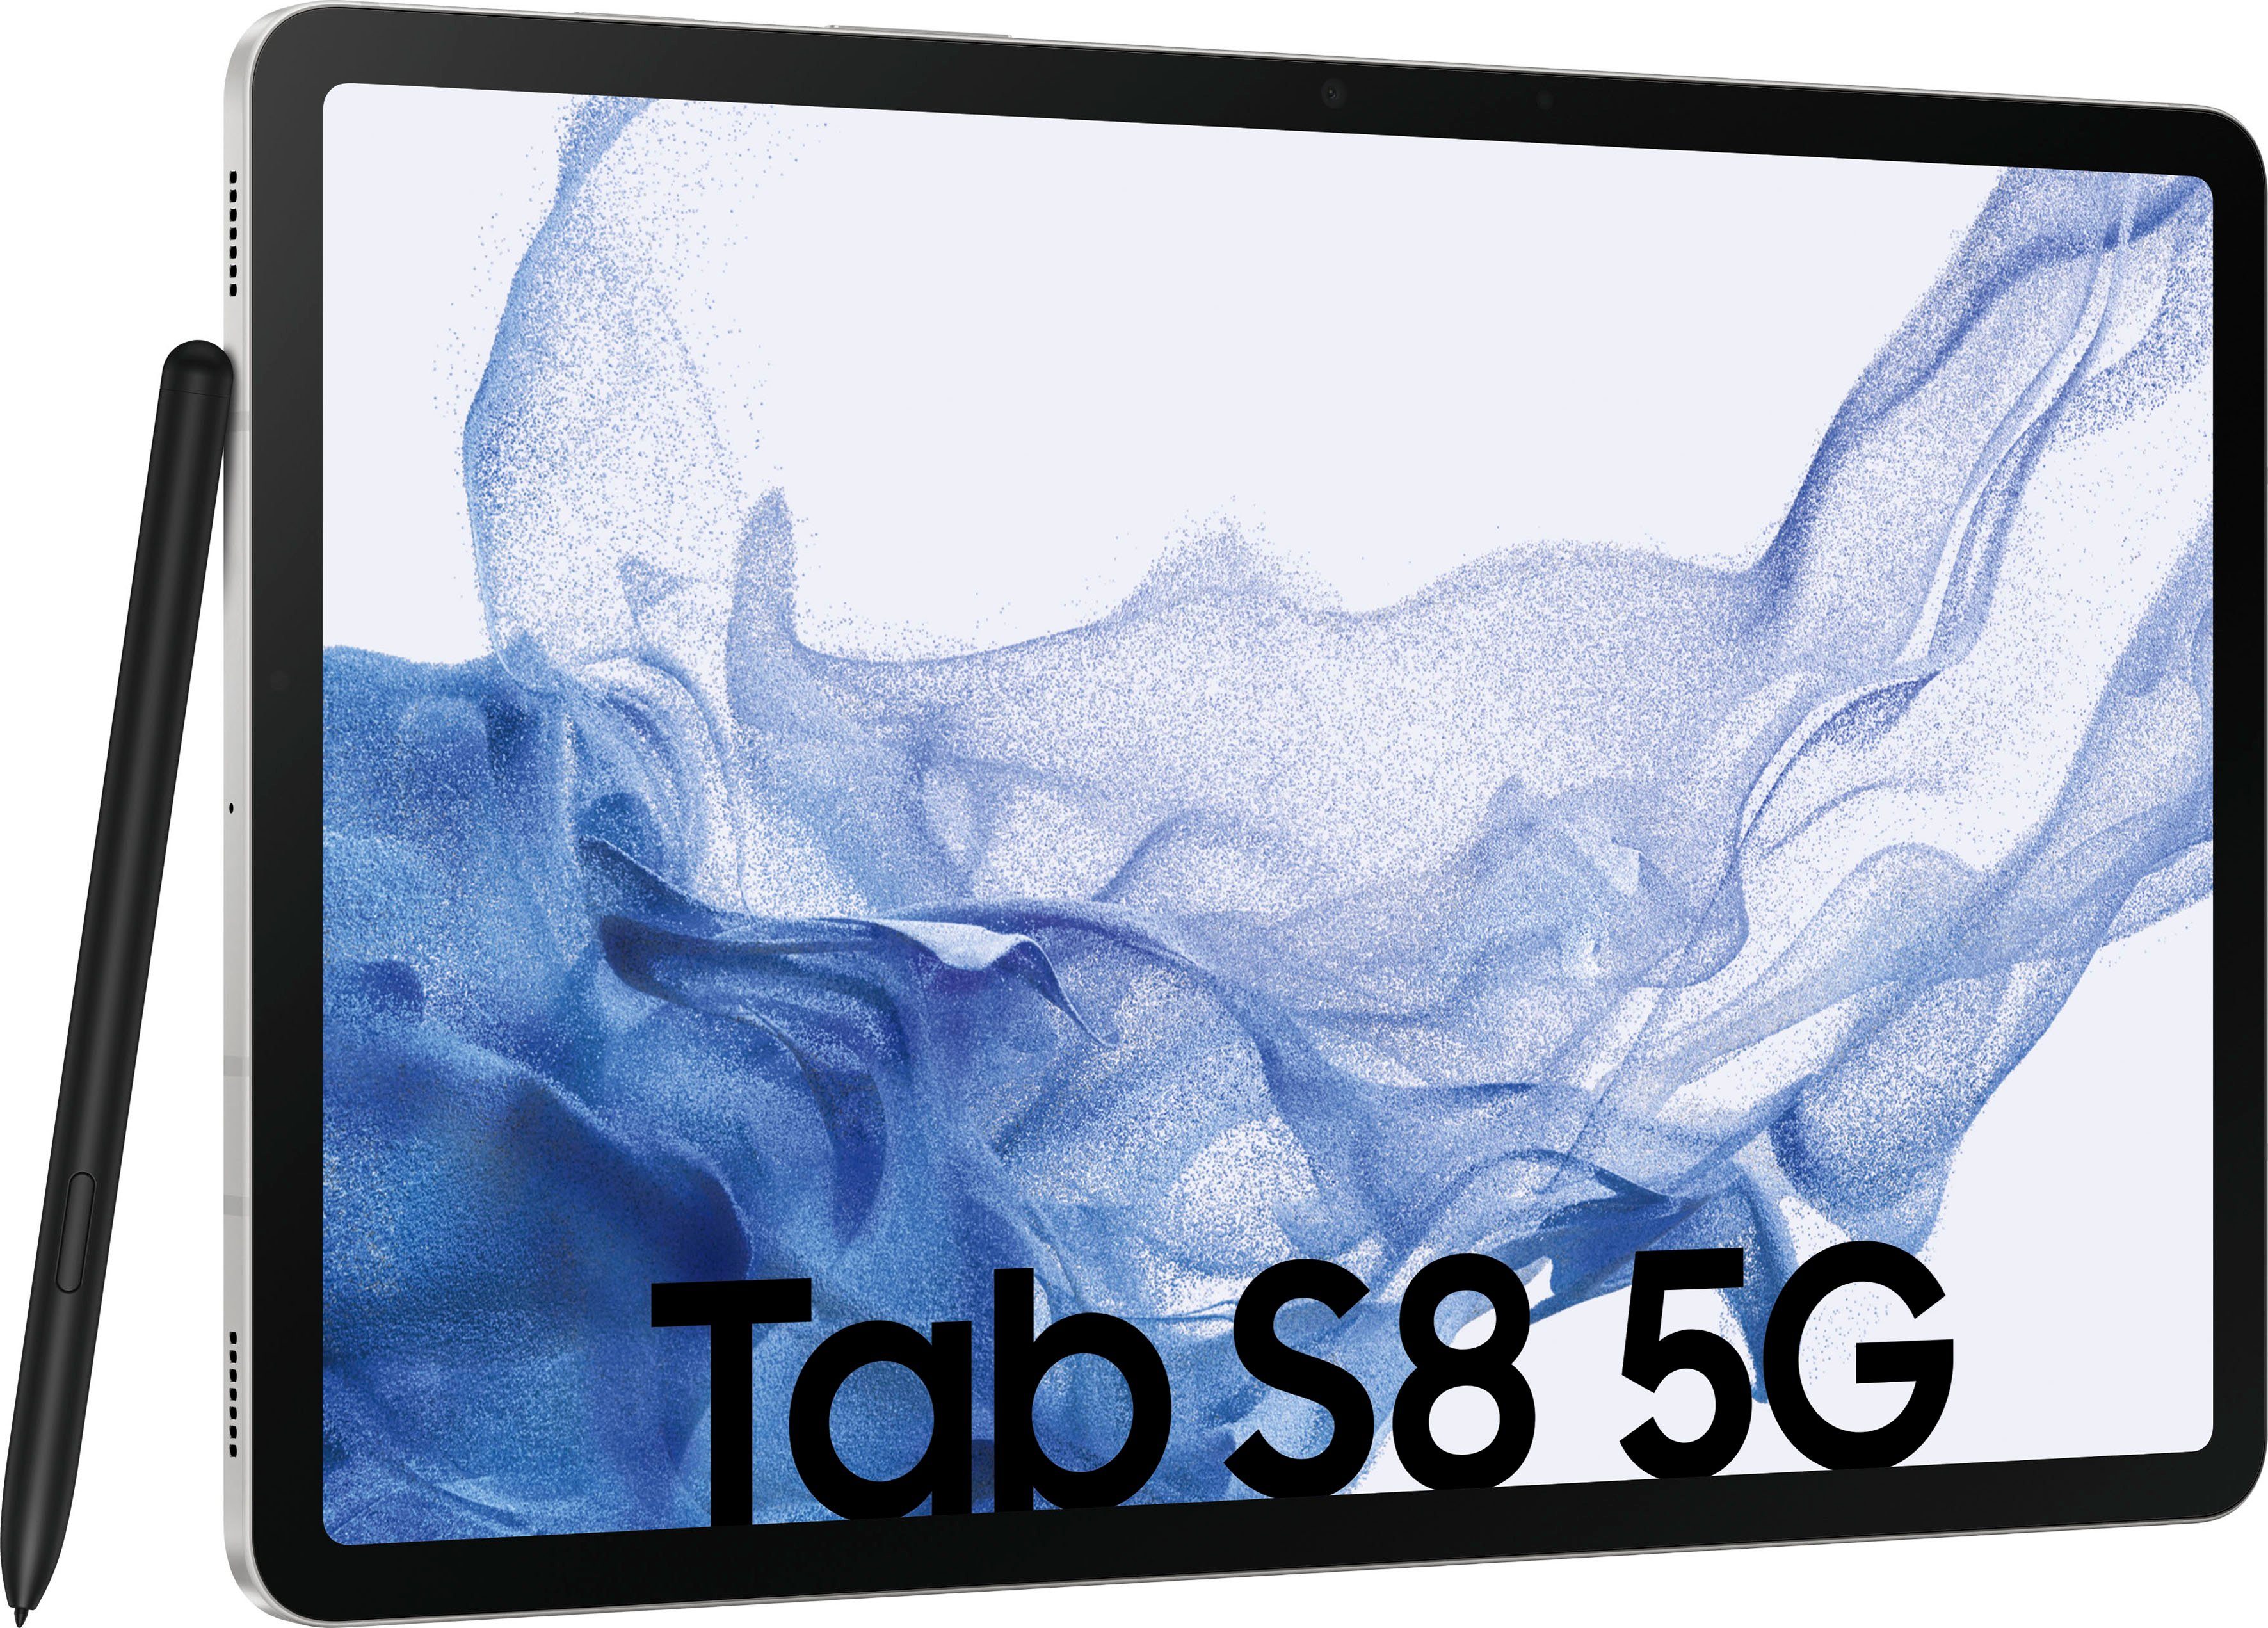 Samsung Galaxy Tablet Android, 5G) 5G (11", Silber GB, Tab S8 128